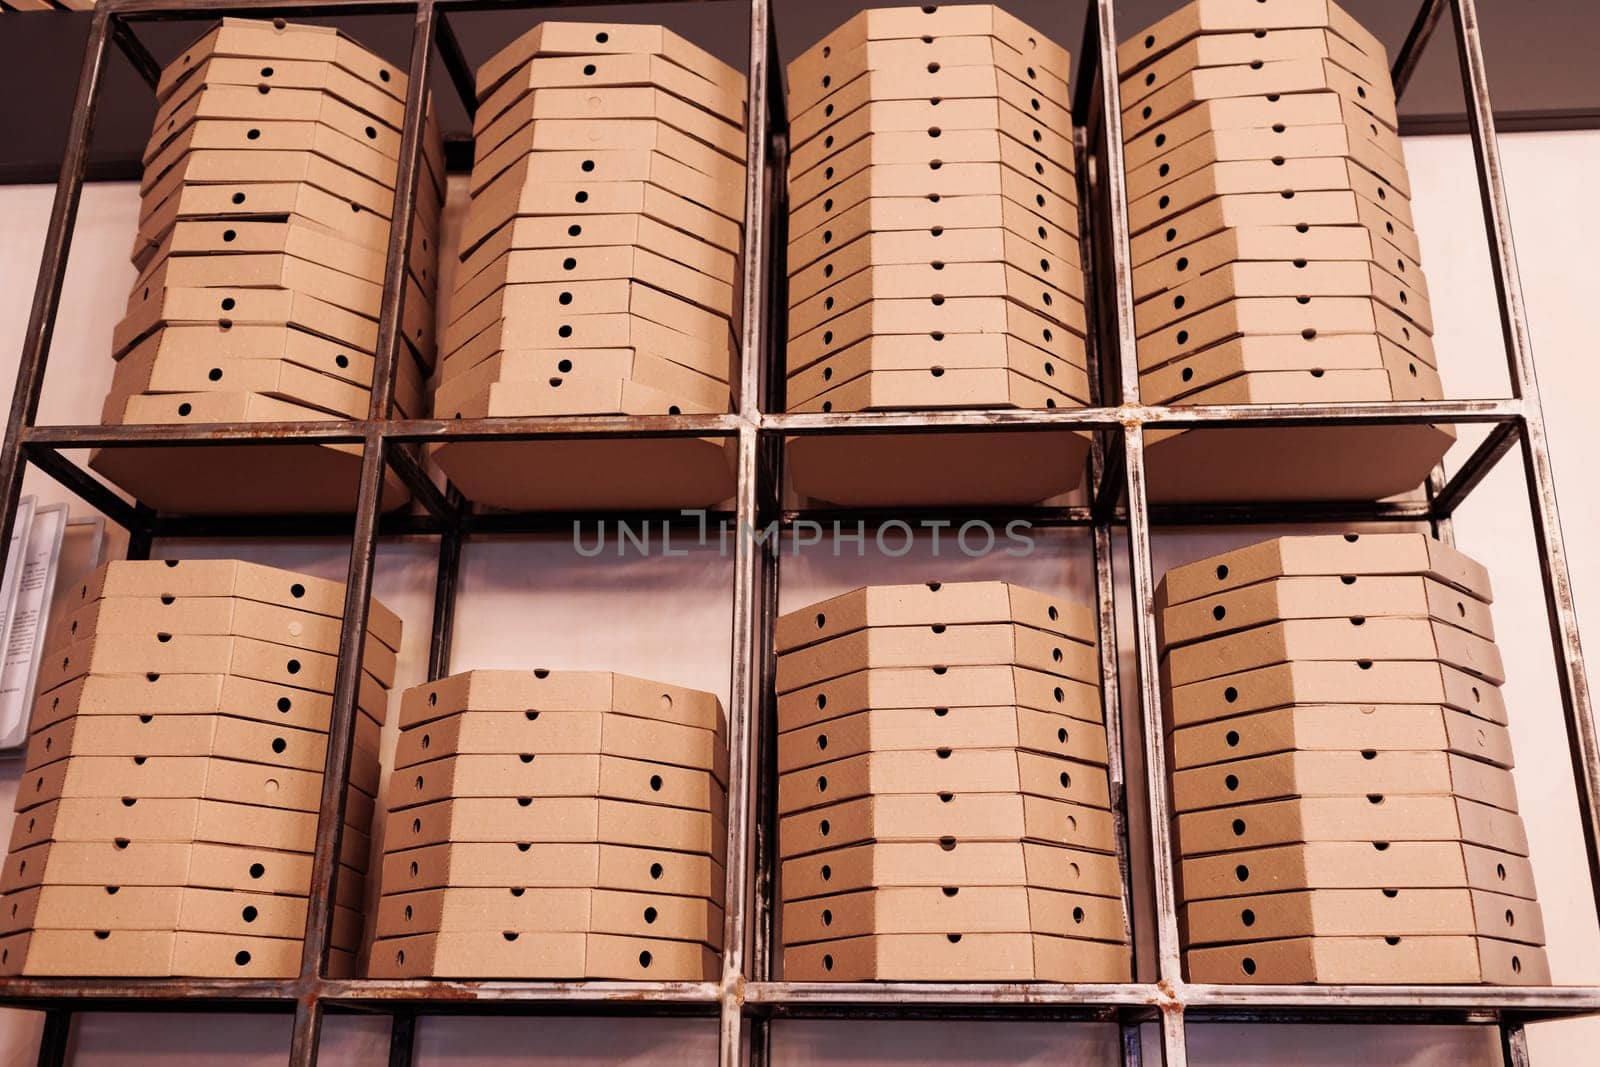 food delivery service. tall stacks of flat brown cardboard pizza boxes on metal shelf ready for delivery. craft packing boxes with pizza in stock in storage.